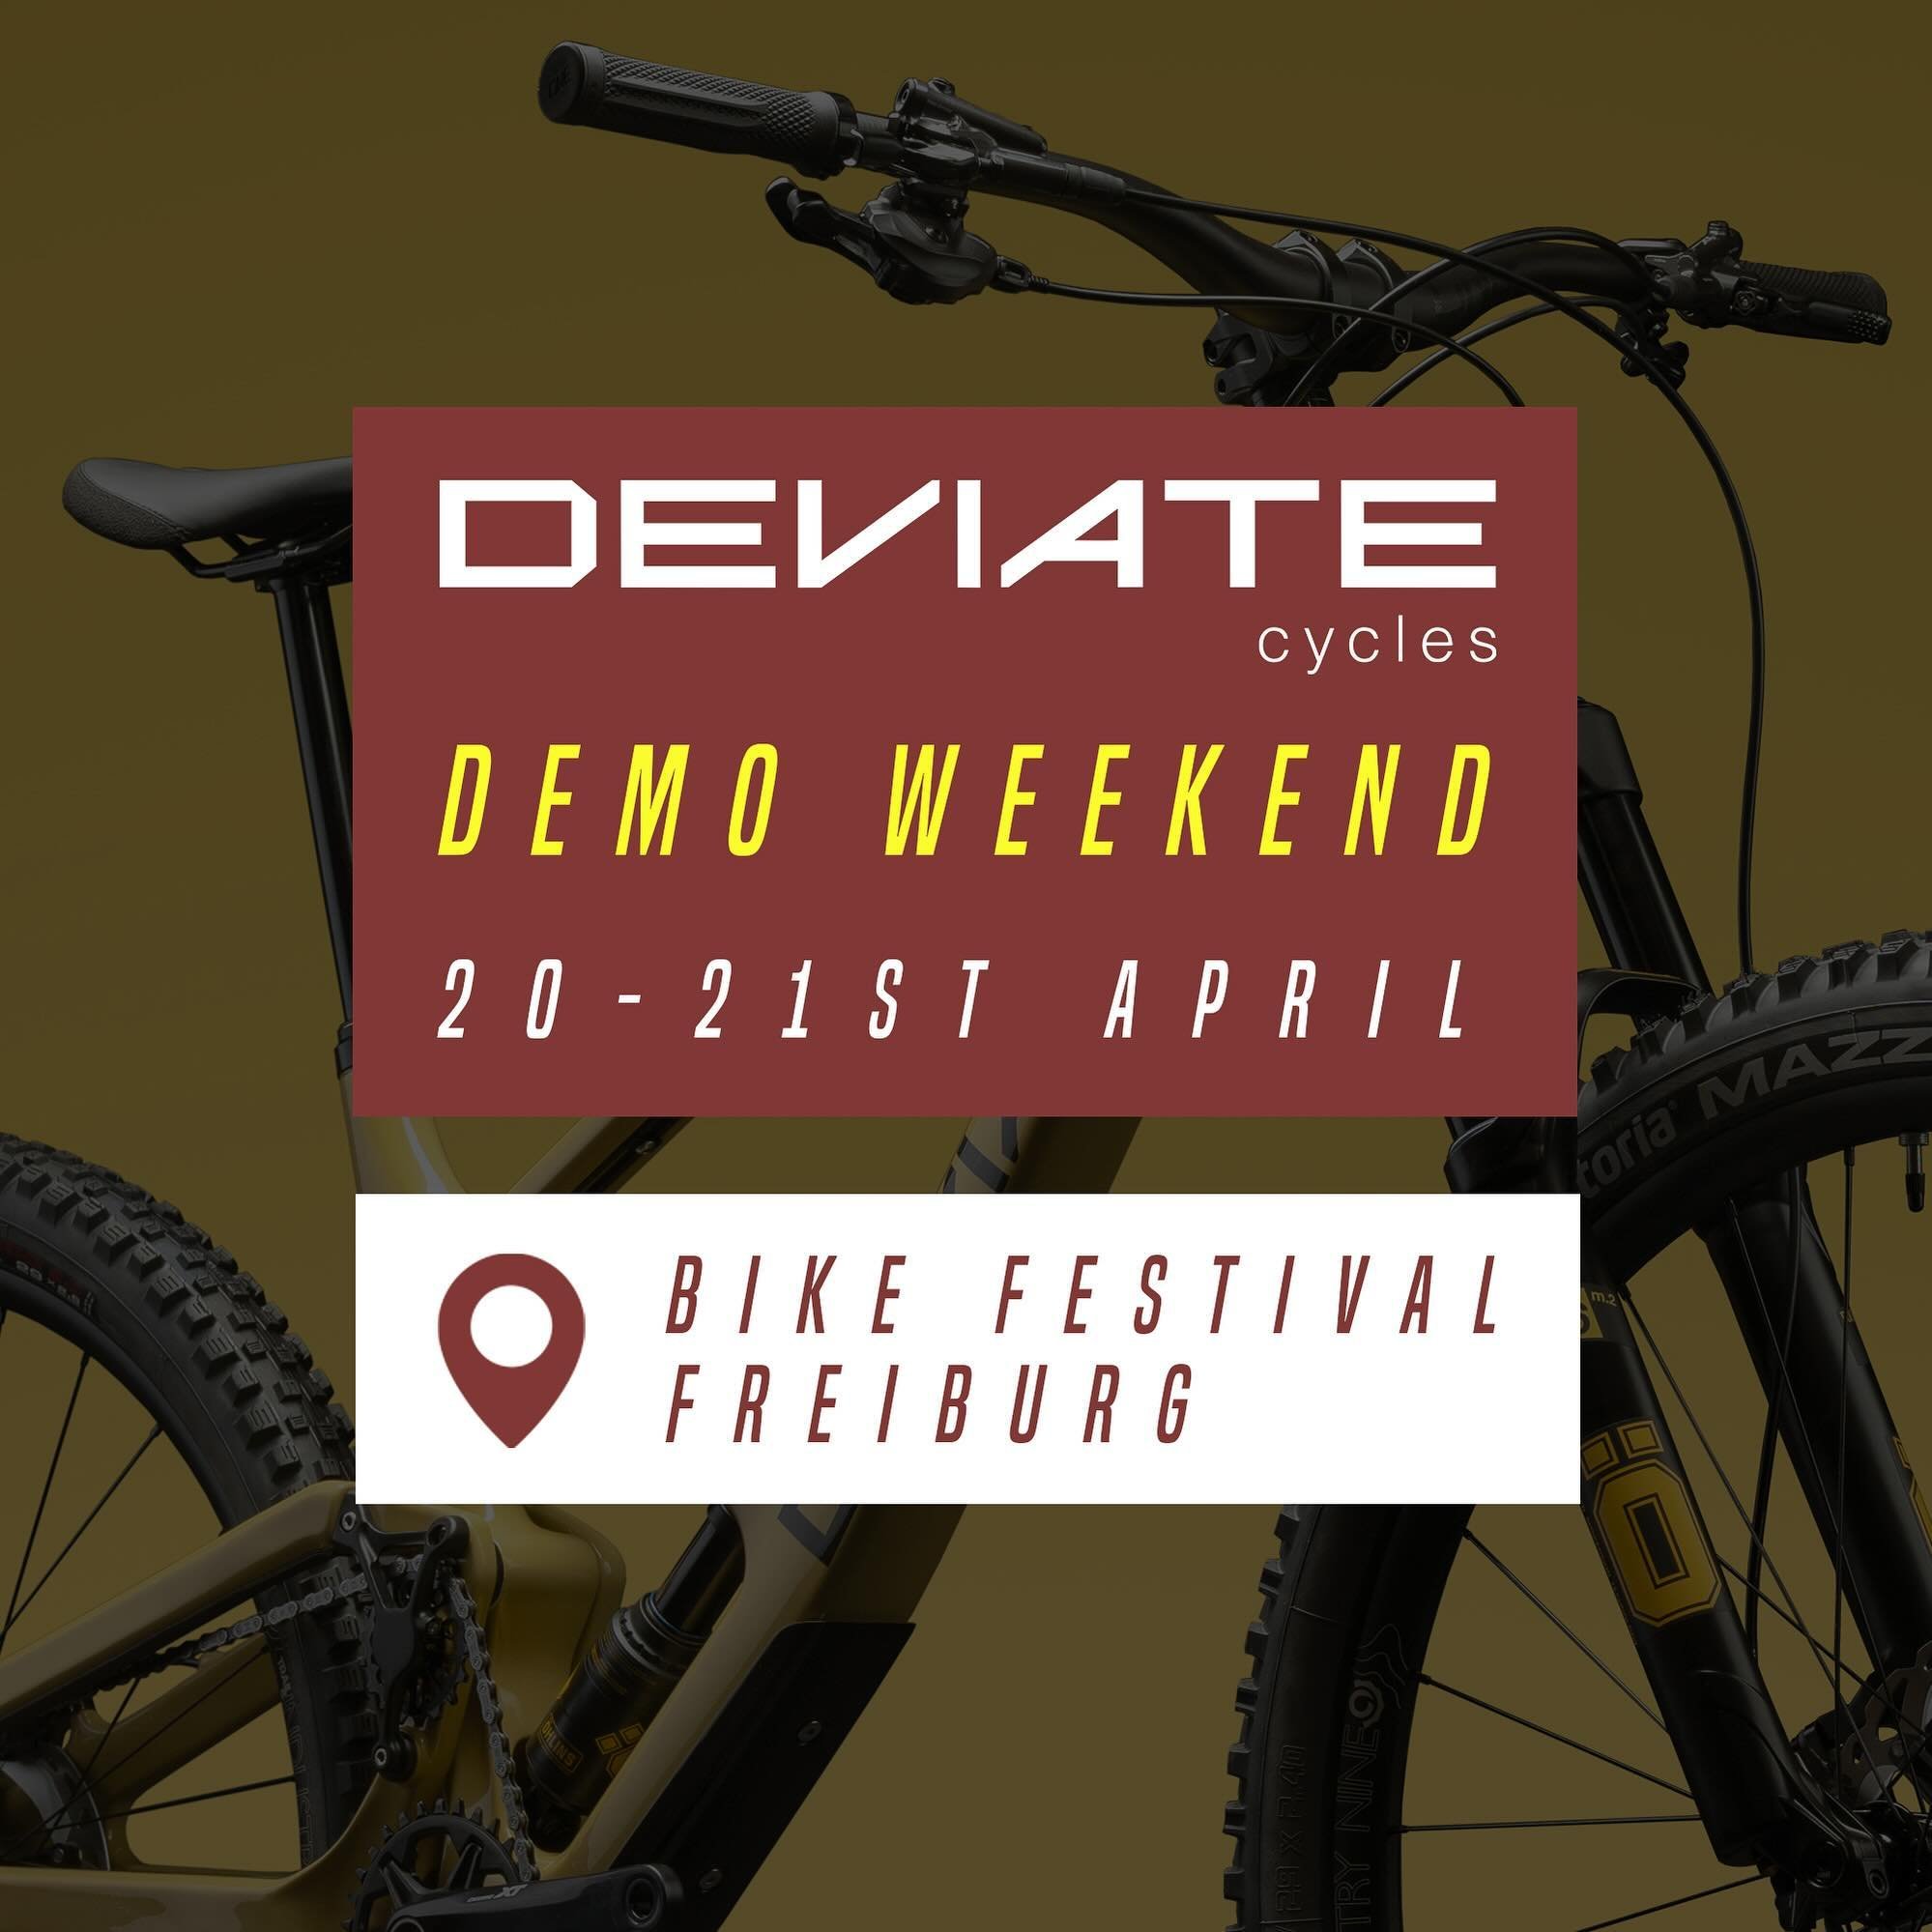 Excited to announce that we are heading to Germany for the @bikefestivalfreiburg this weekend! 

We&rsquo;re teaming up with @innercyclebikeshop to run demos of our Highlander II and Claymore across the weekend so if you&rsquo;re attending, hit the l